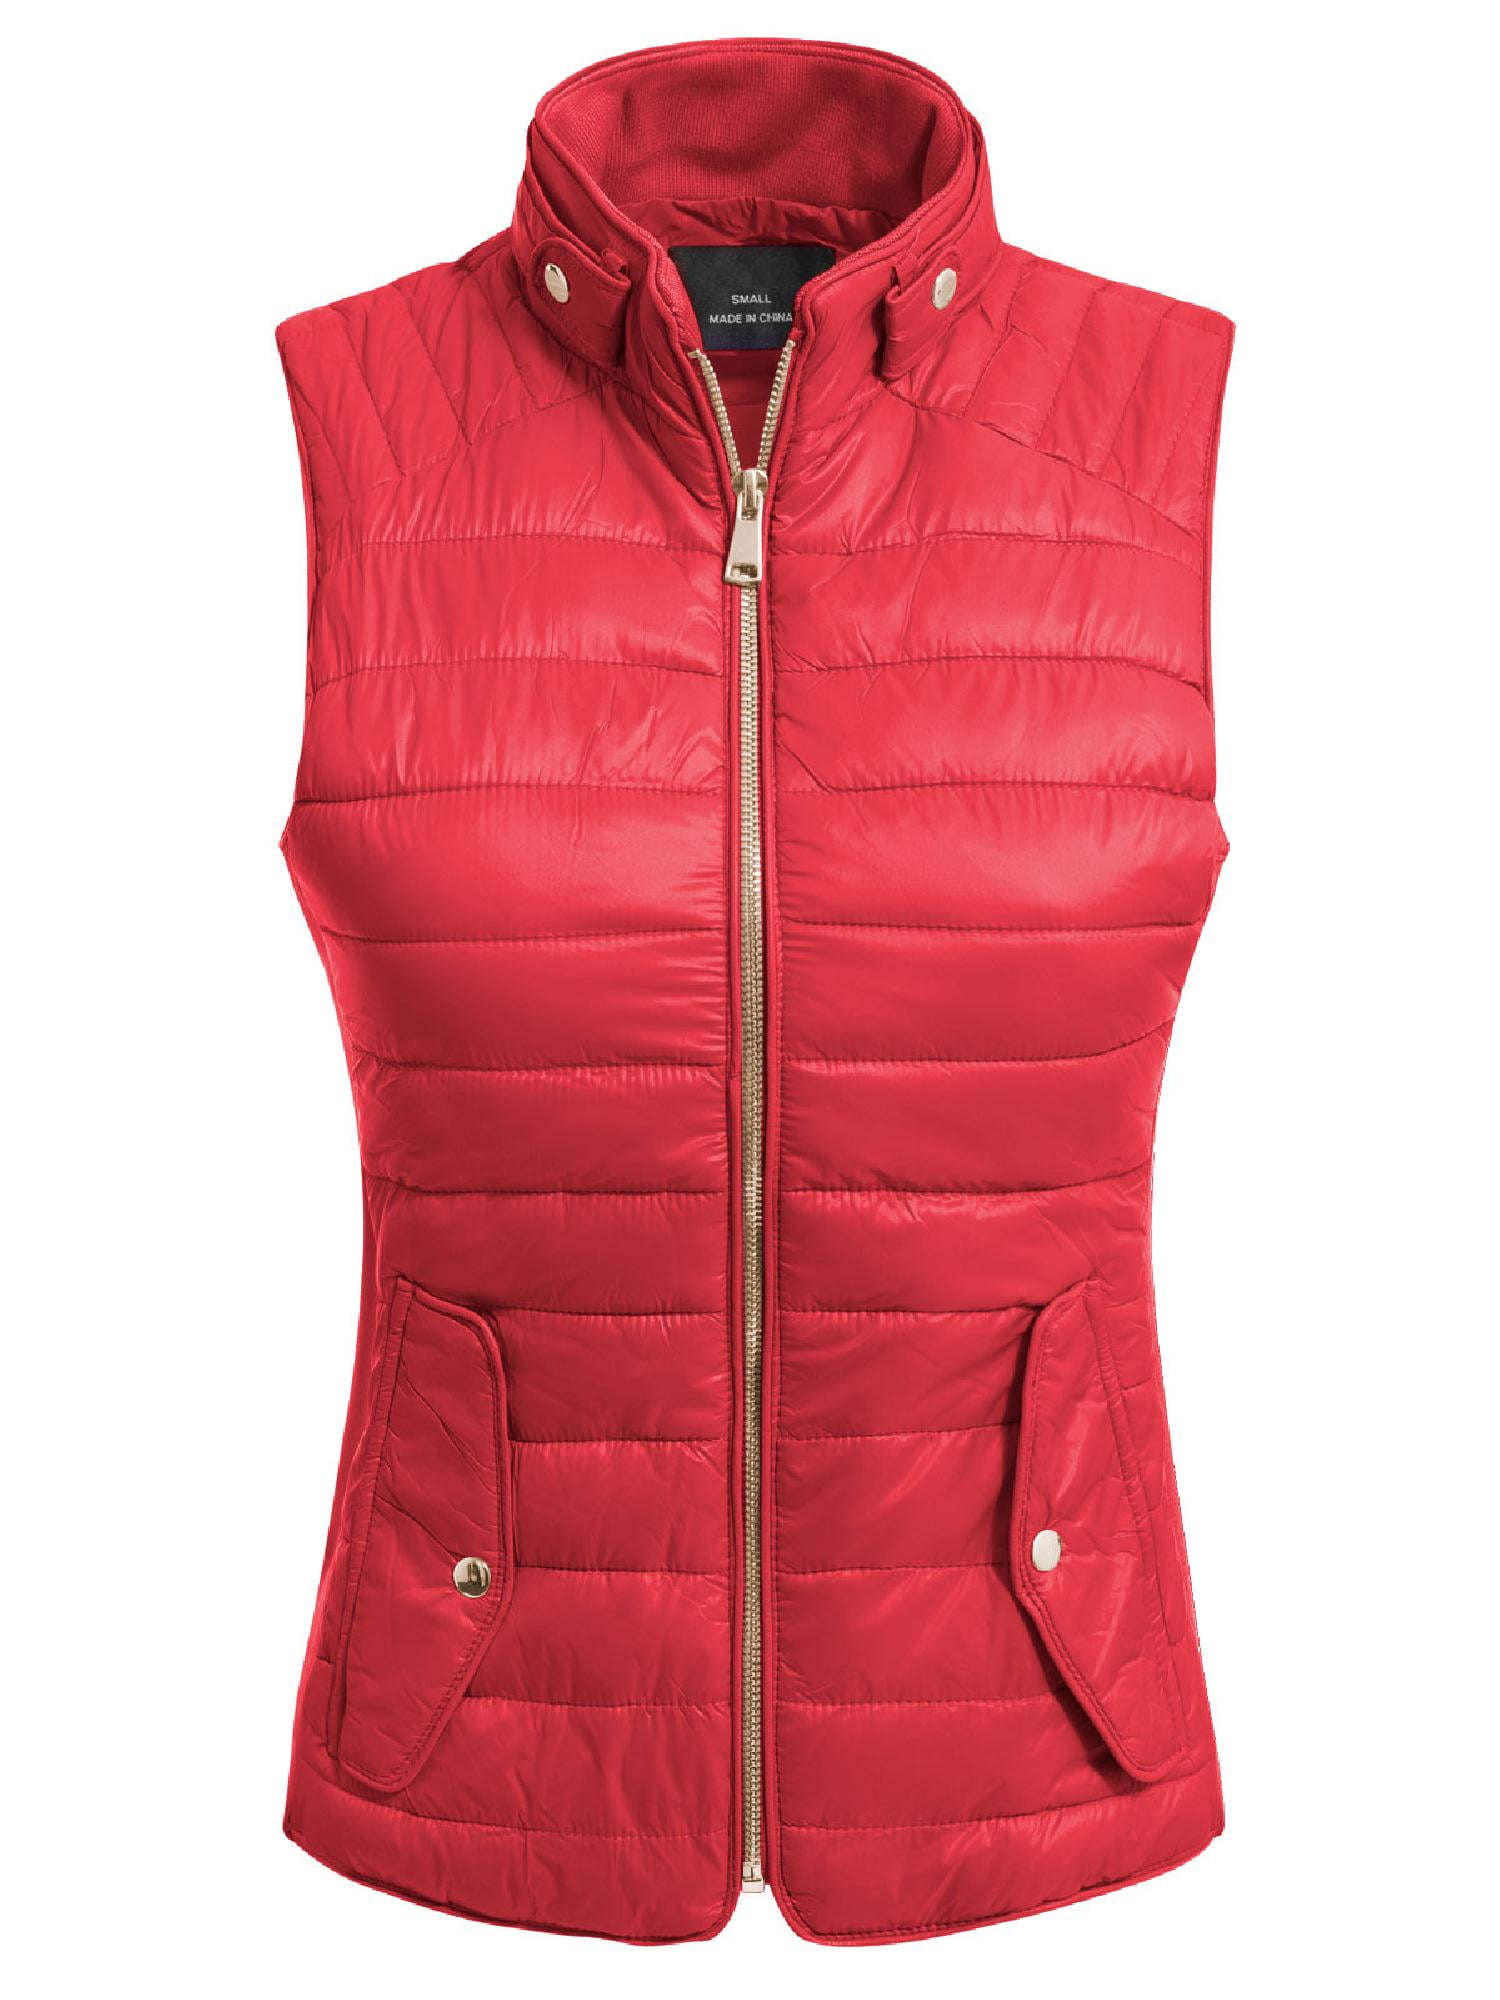 MixMatchy Women's Padded Vest Lightweight Stand Collar Zip-up Quilted Gilet 